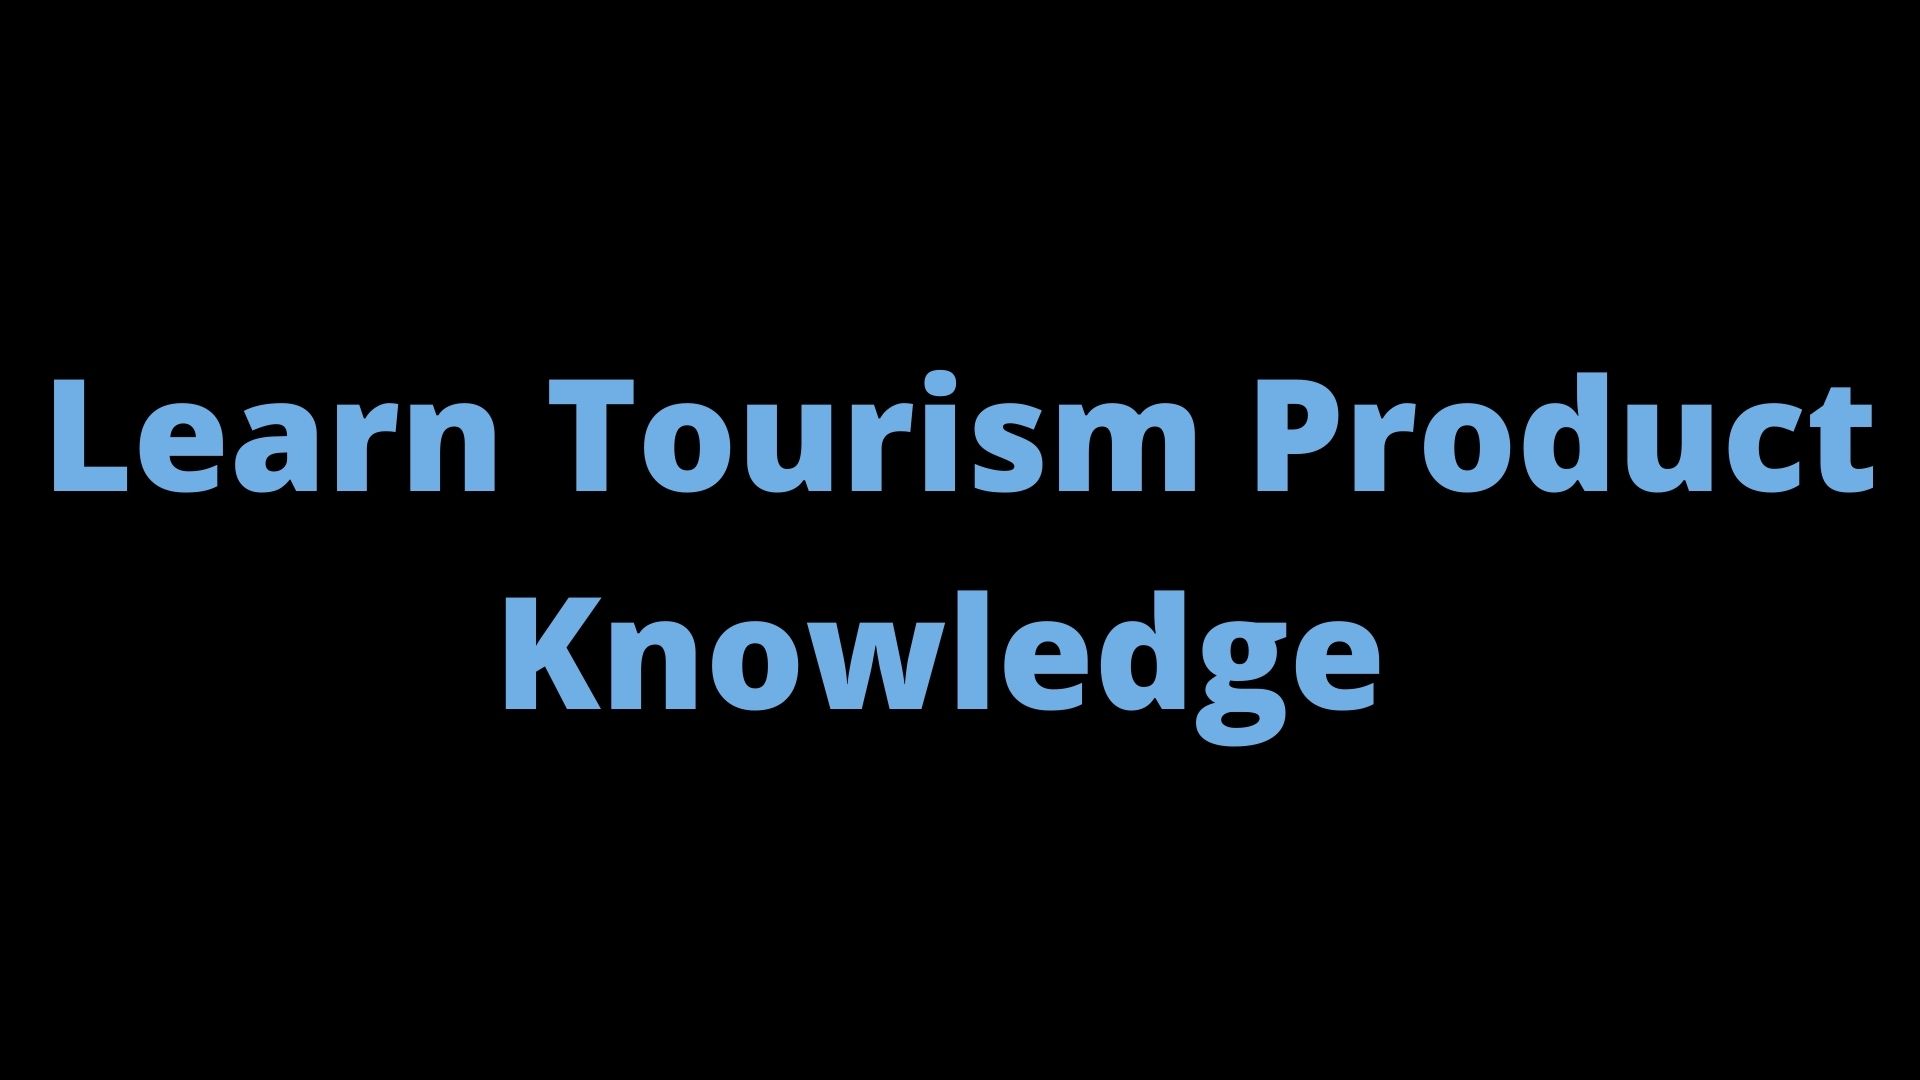 Tourism Product Knowledge